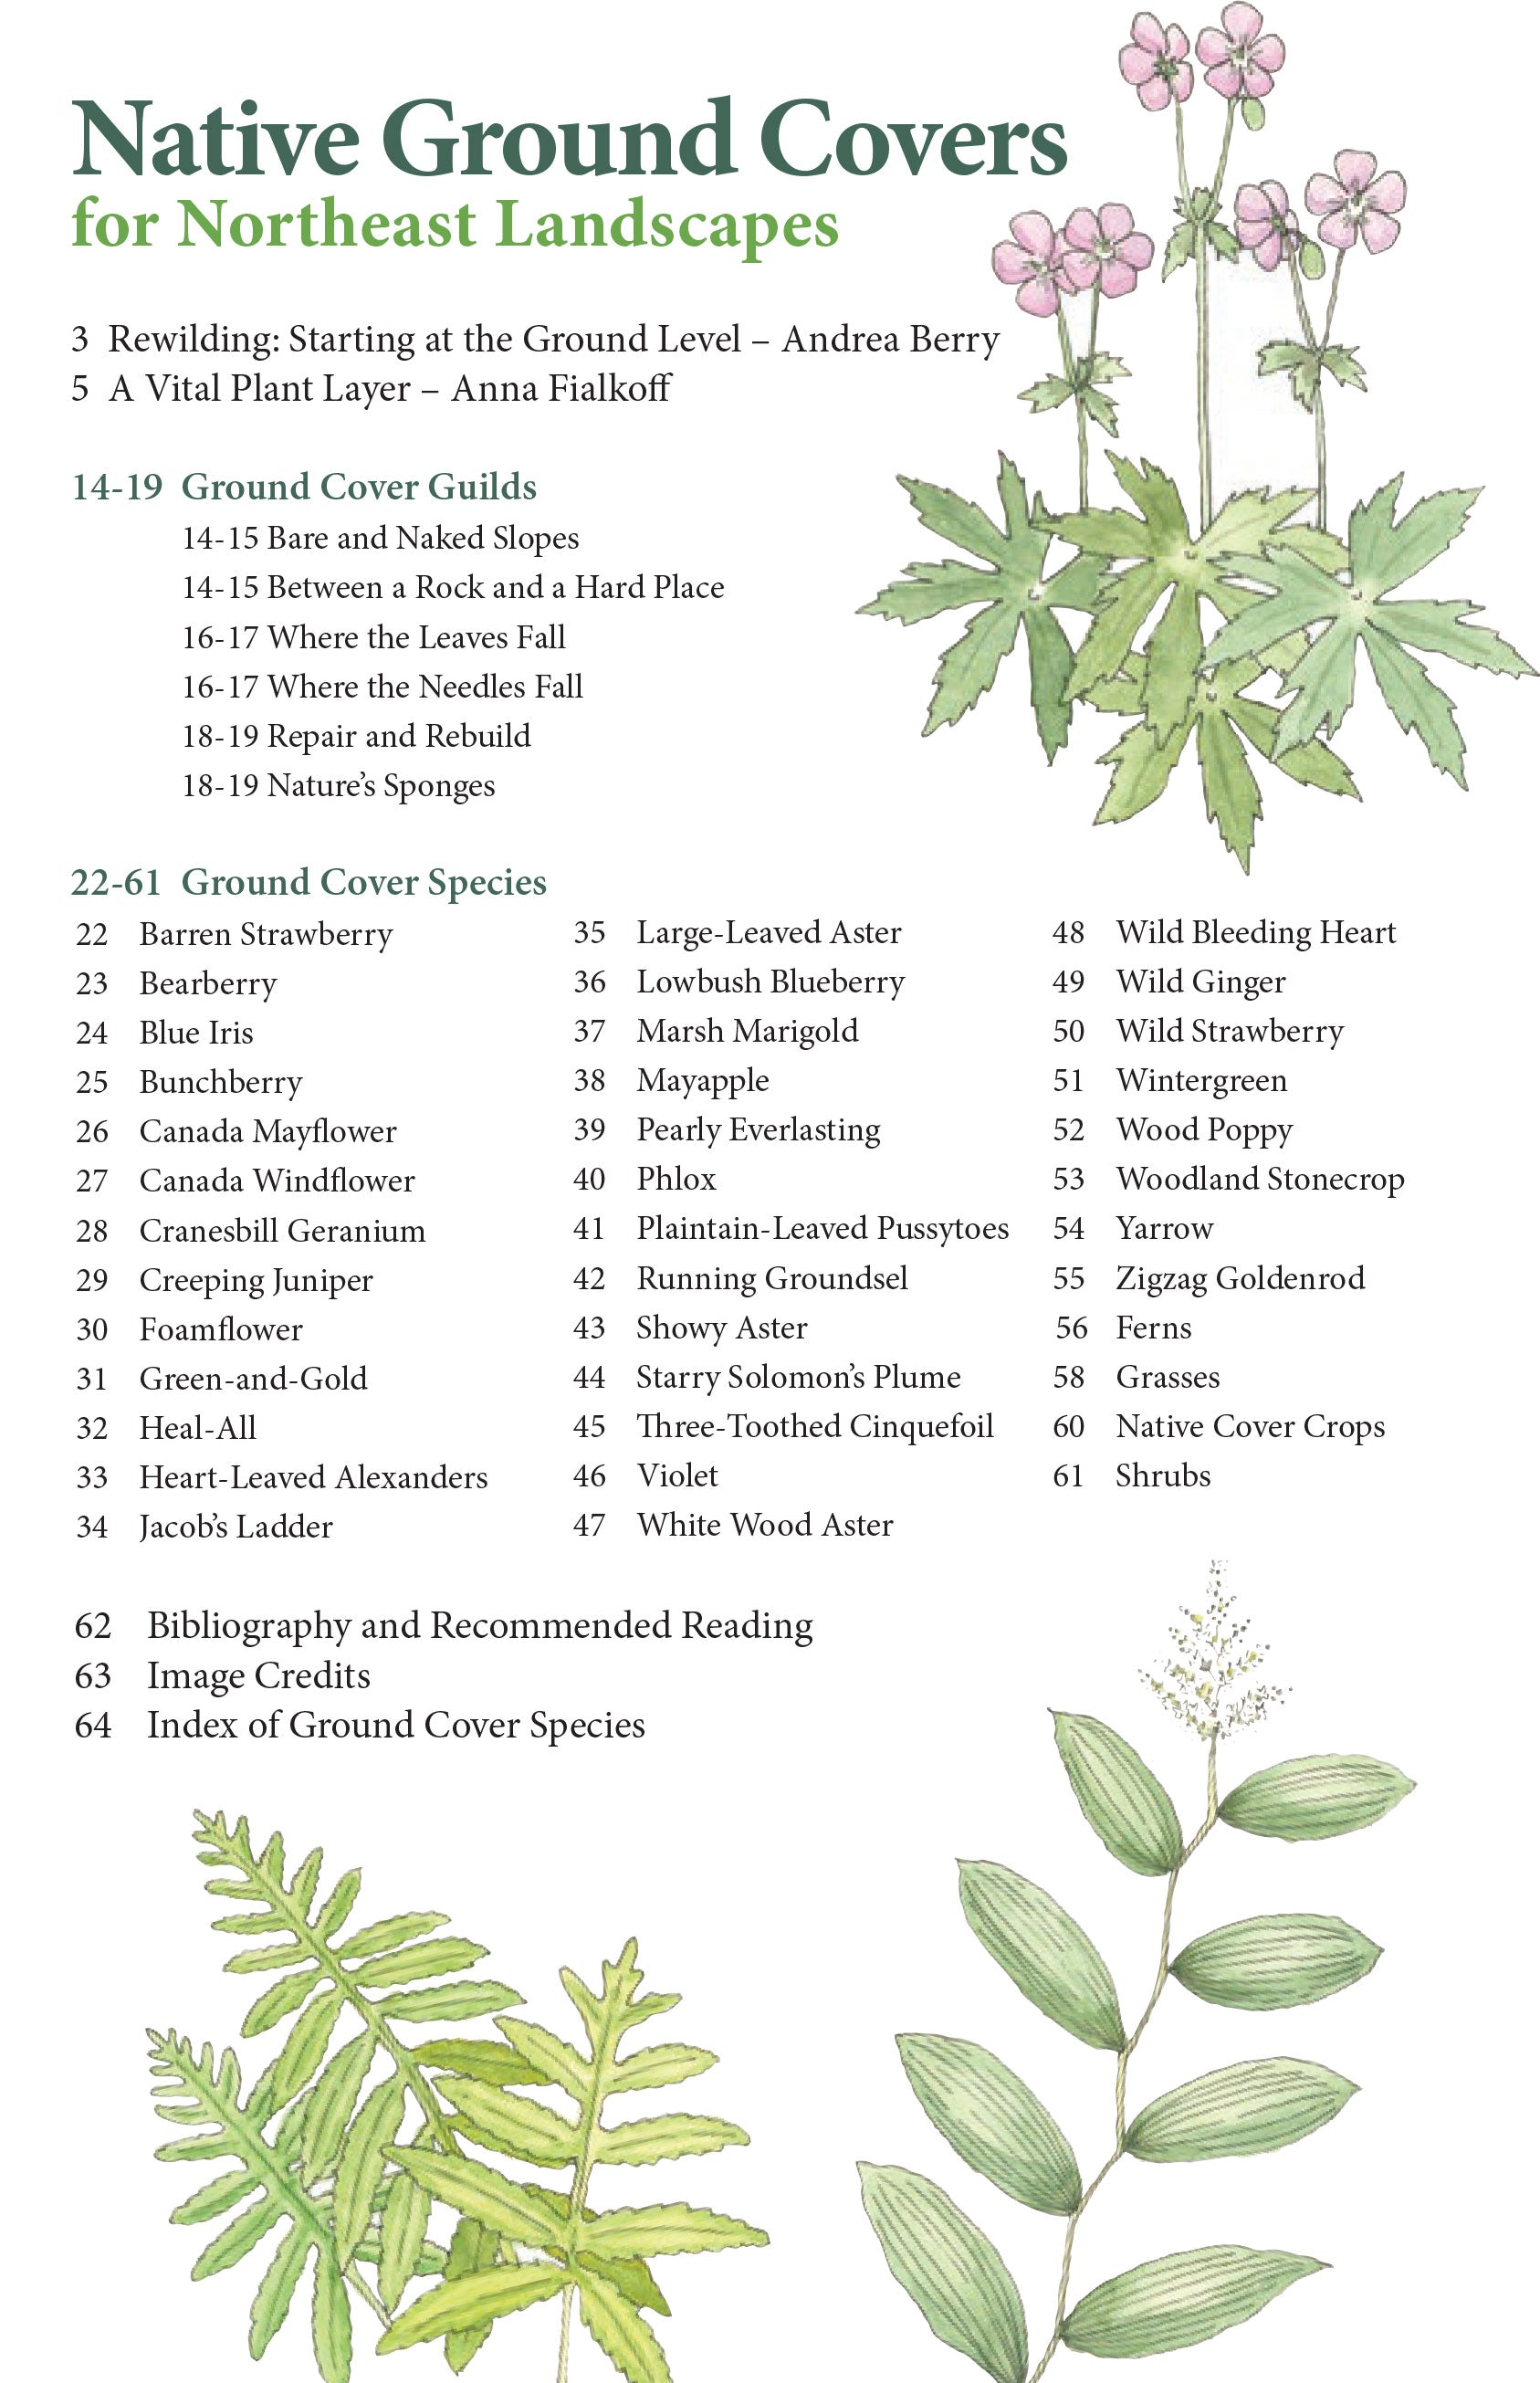 Native Ground Covers for Northeast Landscapes: A Wild Seed Project Guide